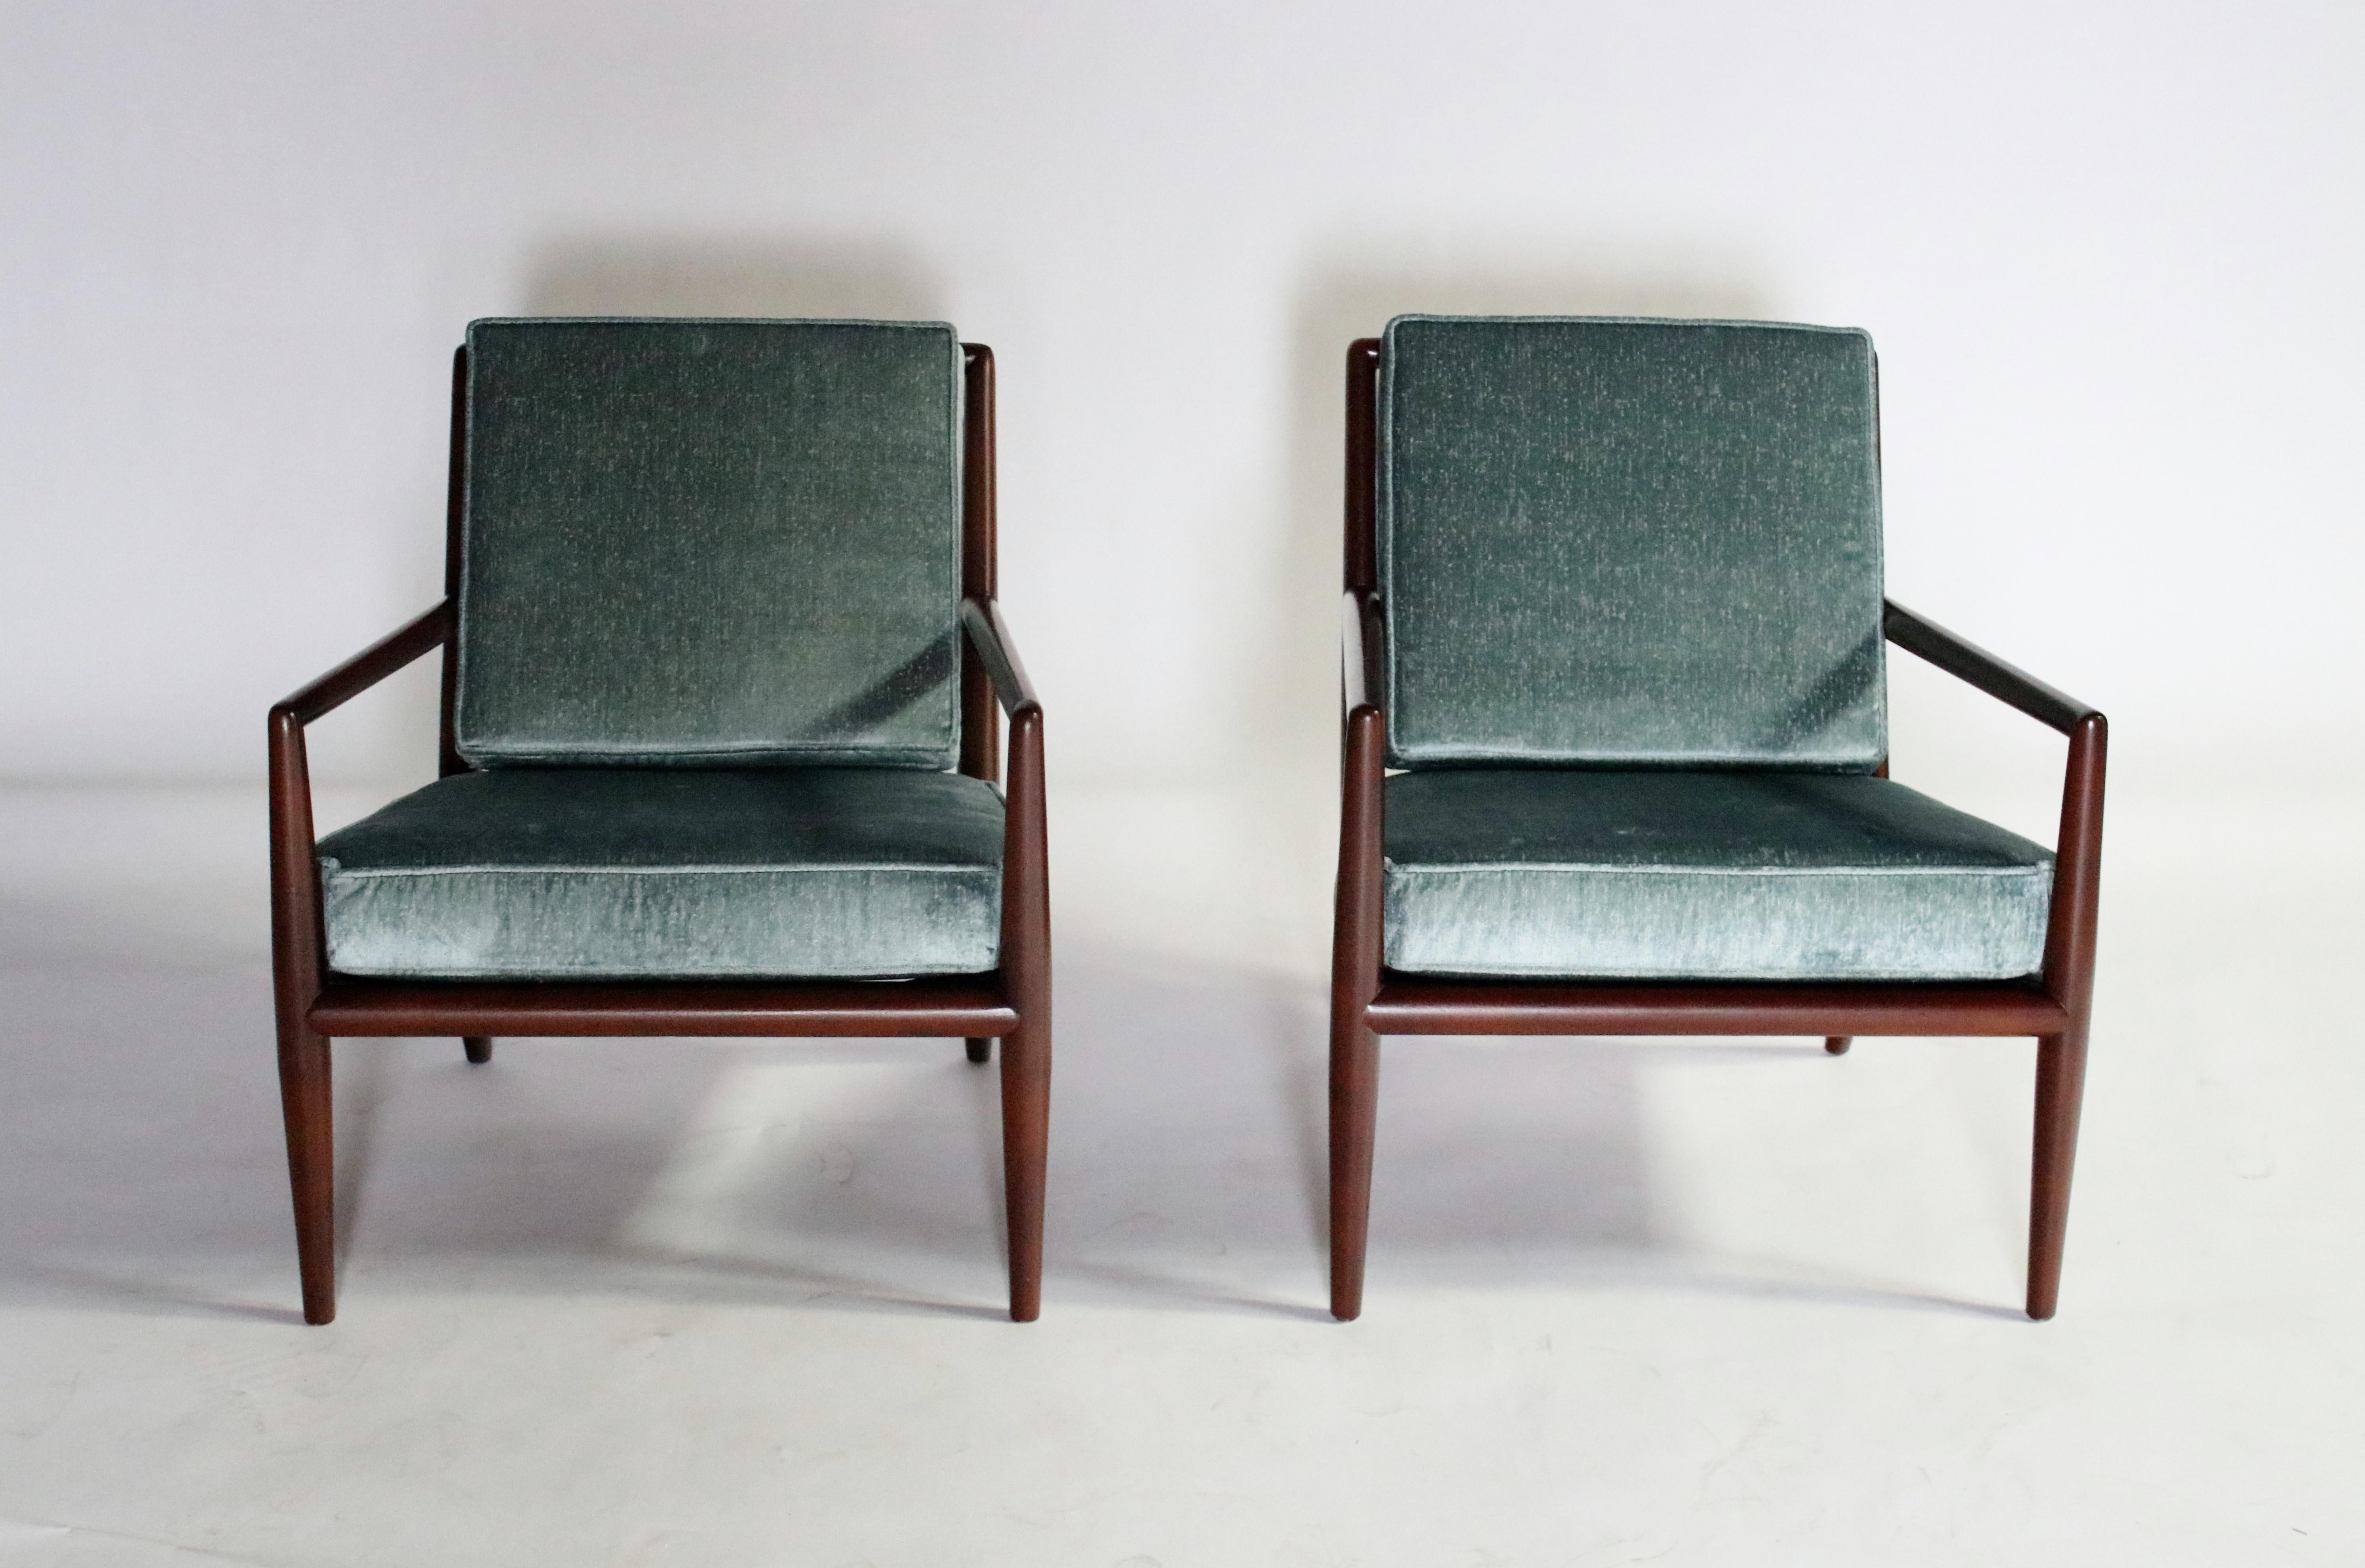 Elegantly updated 1950s walnut frame lounge chairs by T.H. Robsjohn Gibbings restored and reupholstered in a steel blue velvet high-end fabric.